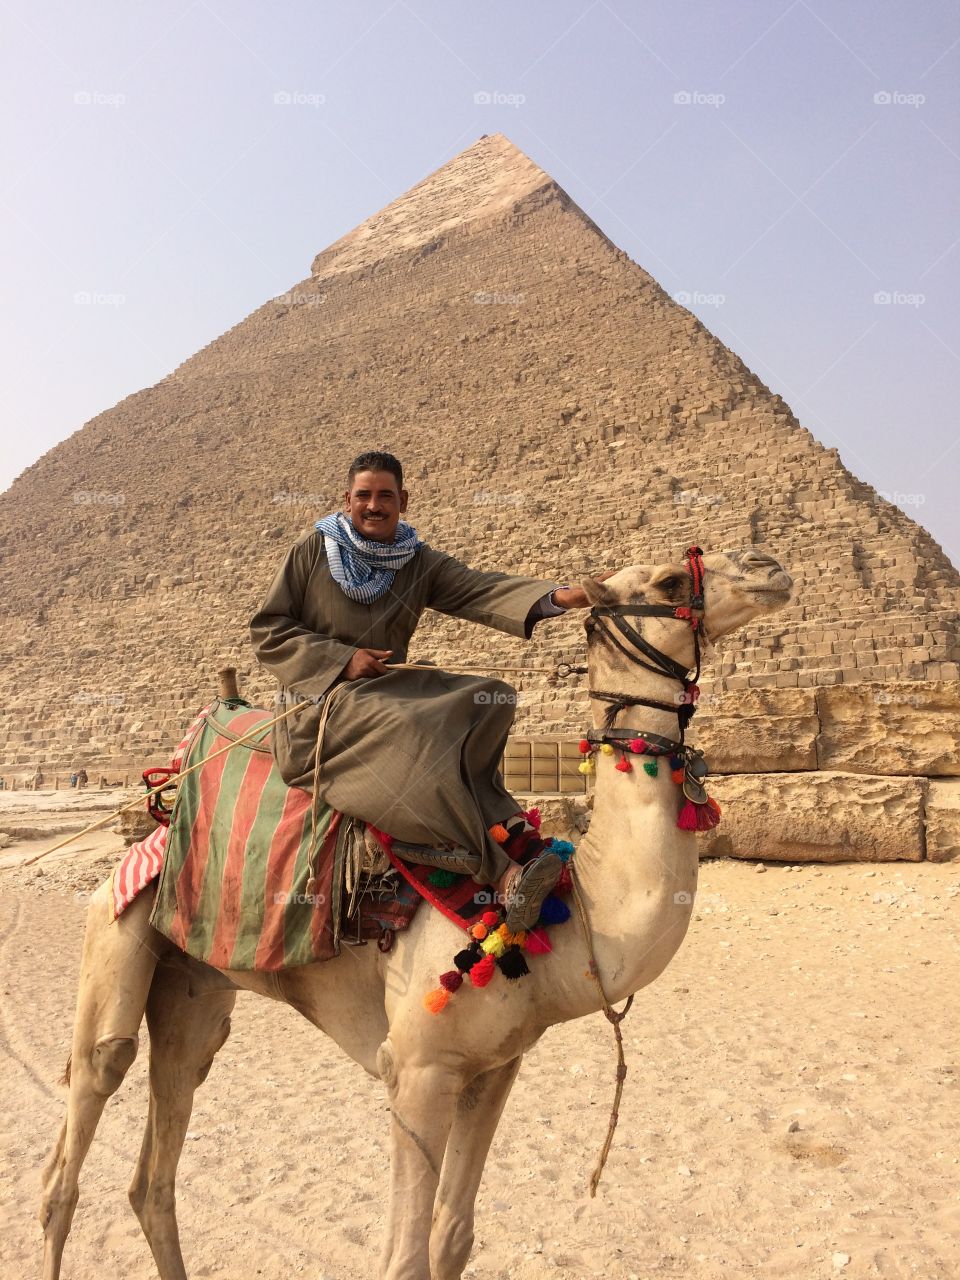 pyramid and camel and friend in egypt